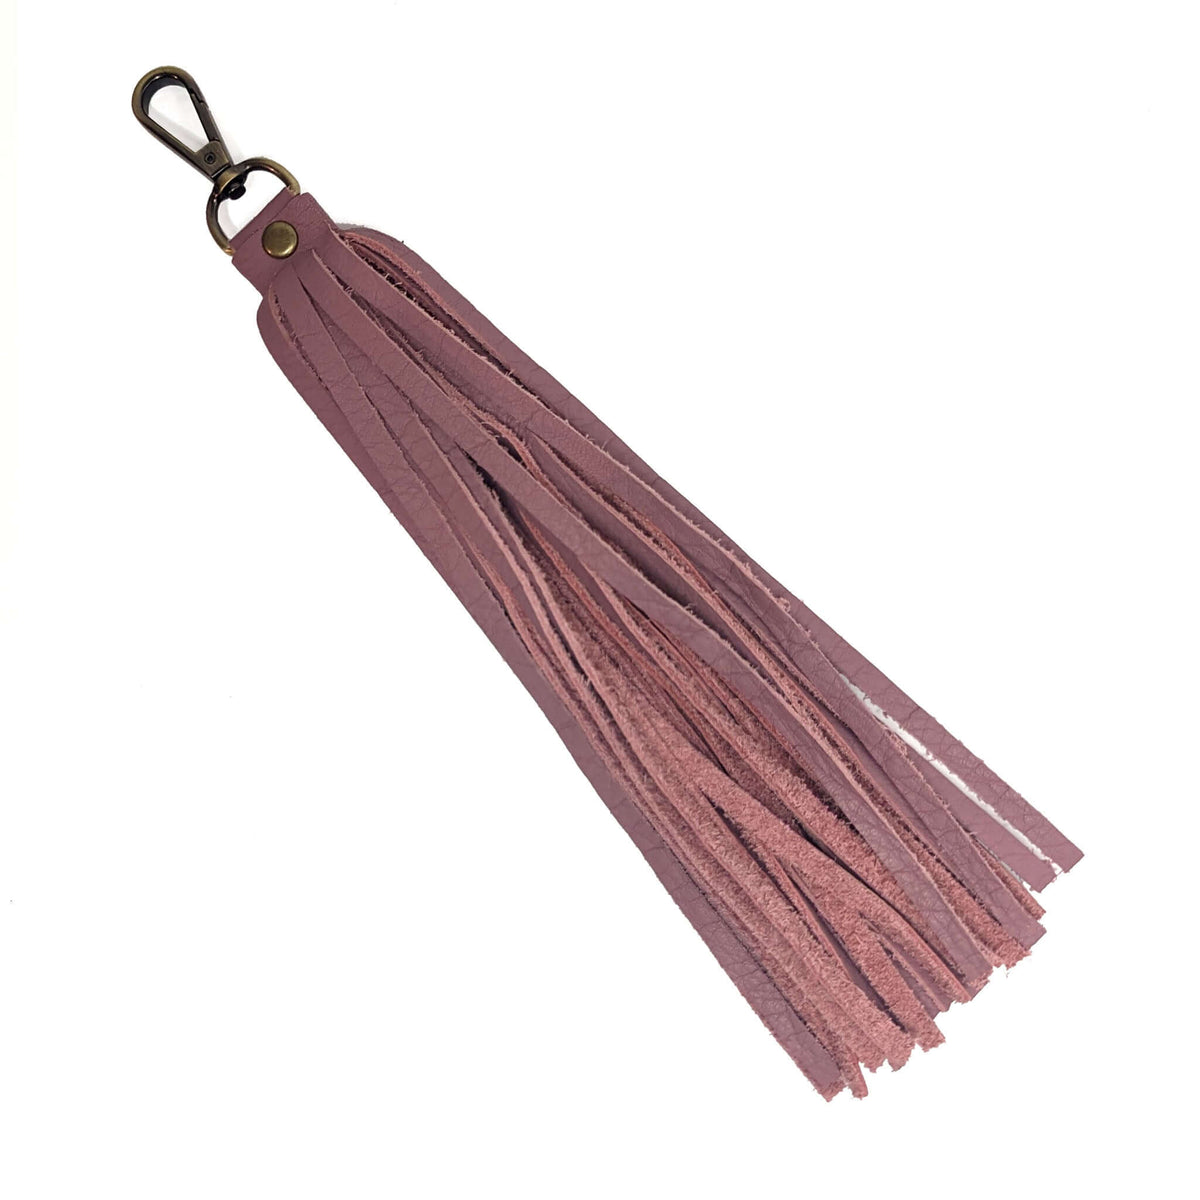 Long Mauve leather bag tassel or key fob, Brynn Capella, made in the USA